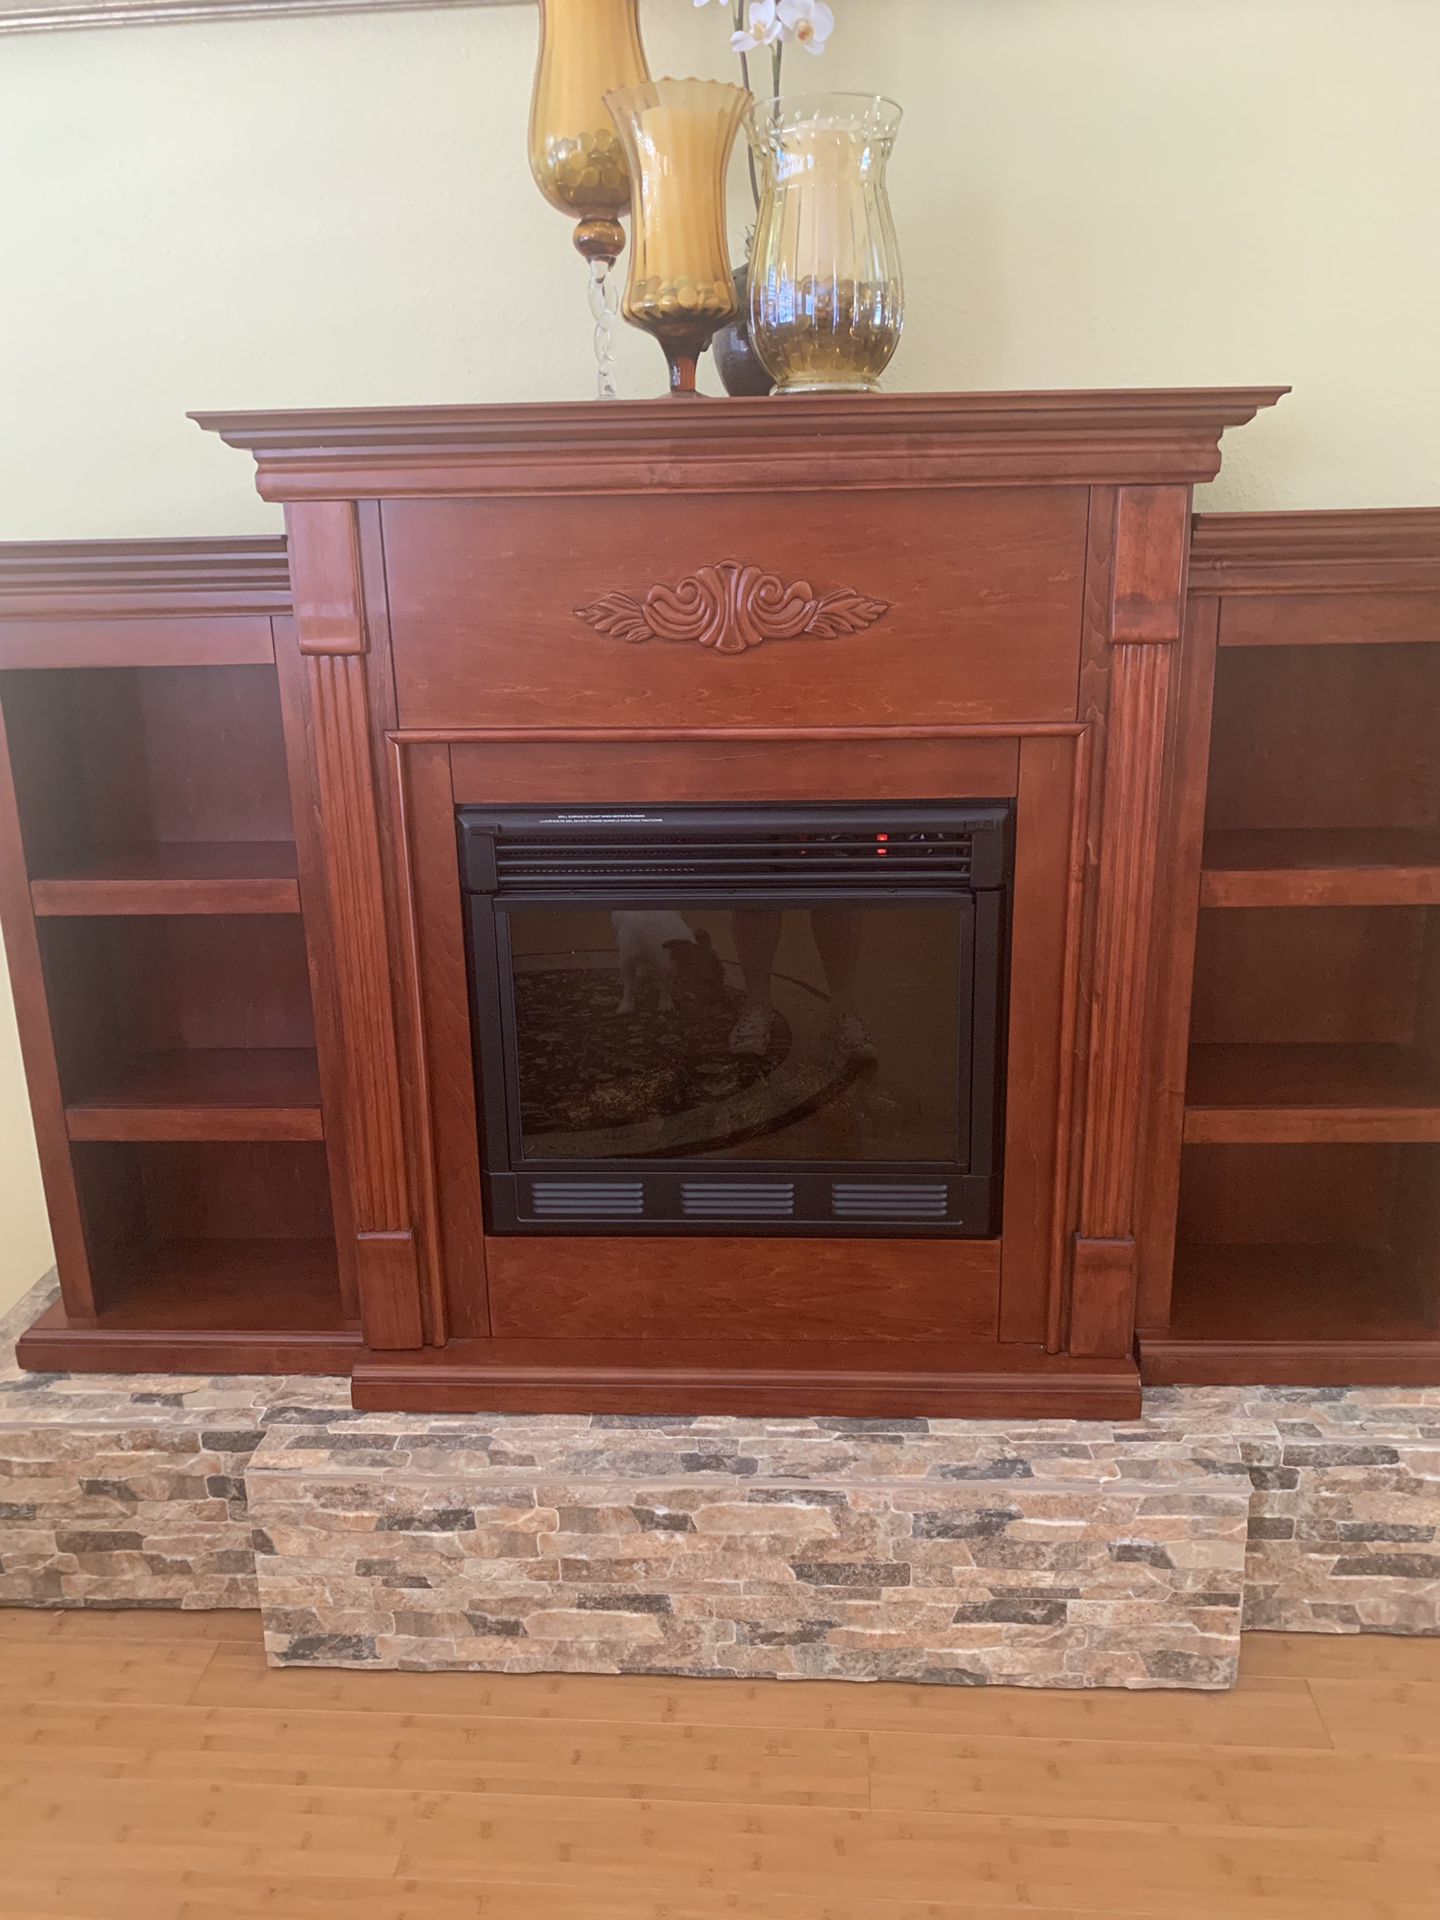 Fireplace and bookcase unit